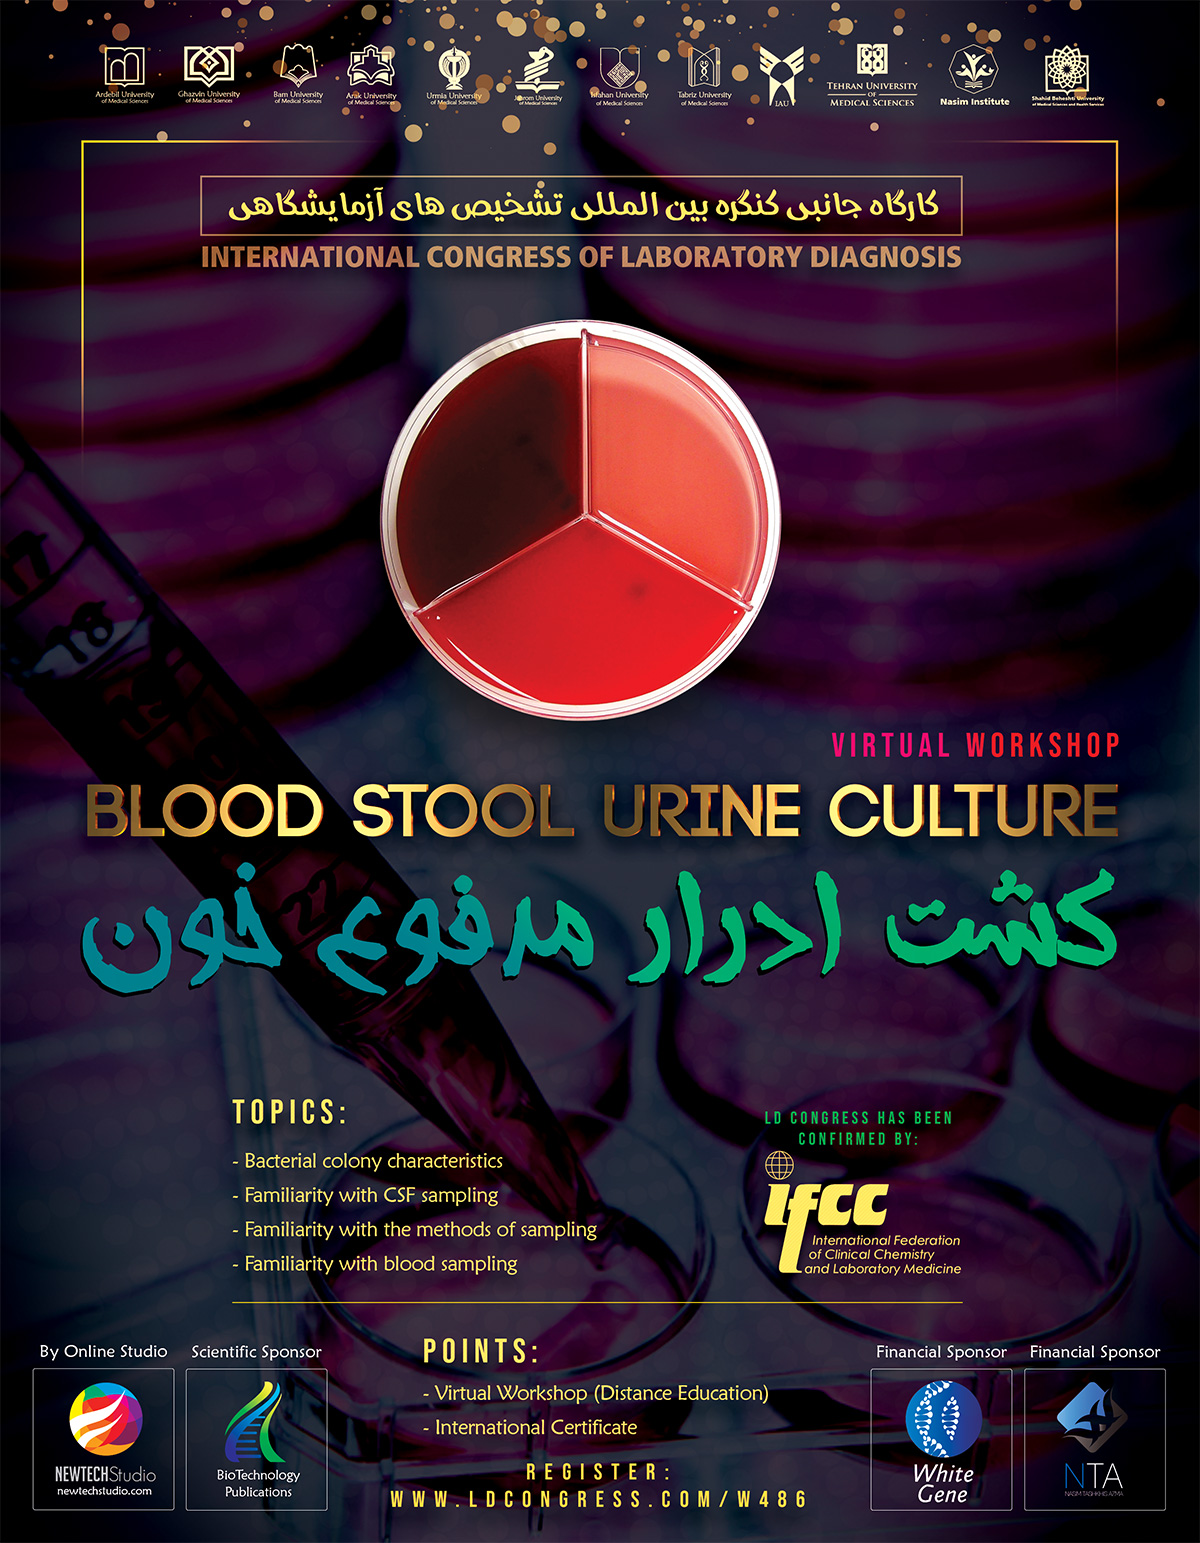 Culture of urine, feces and blood